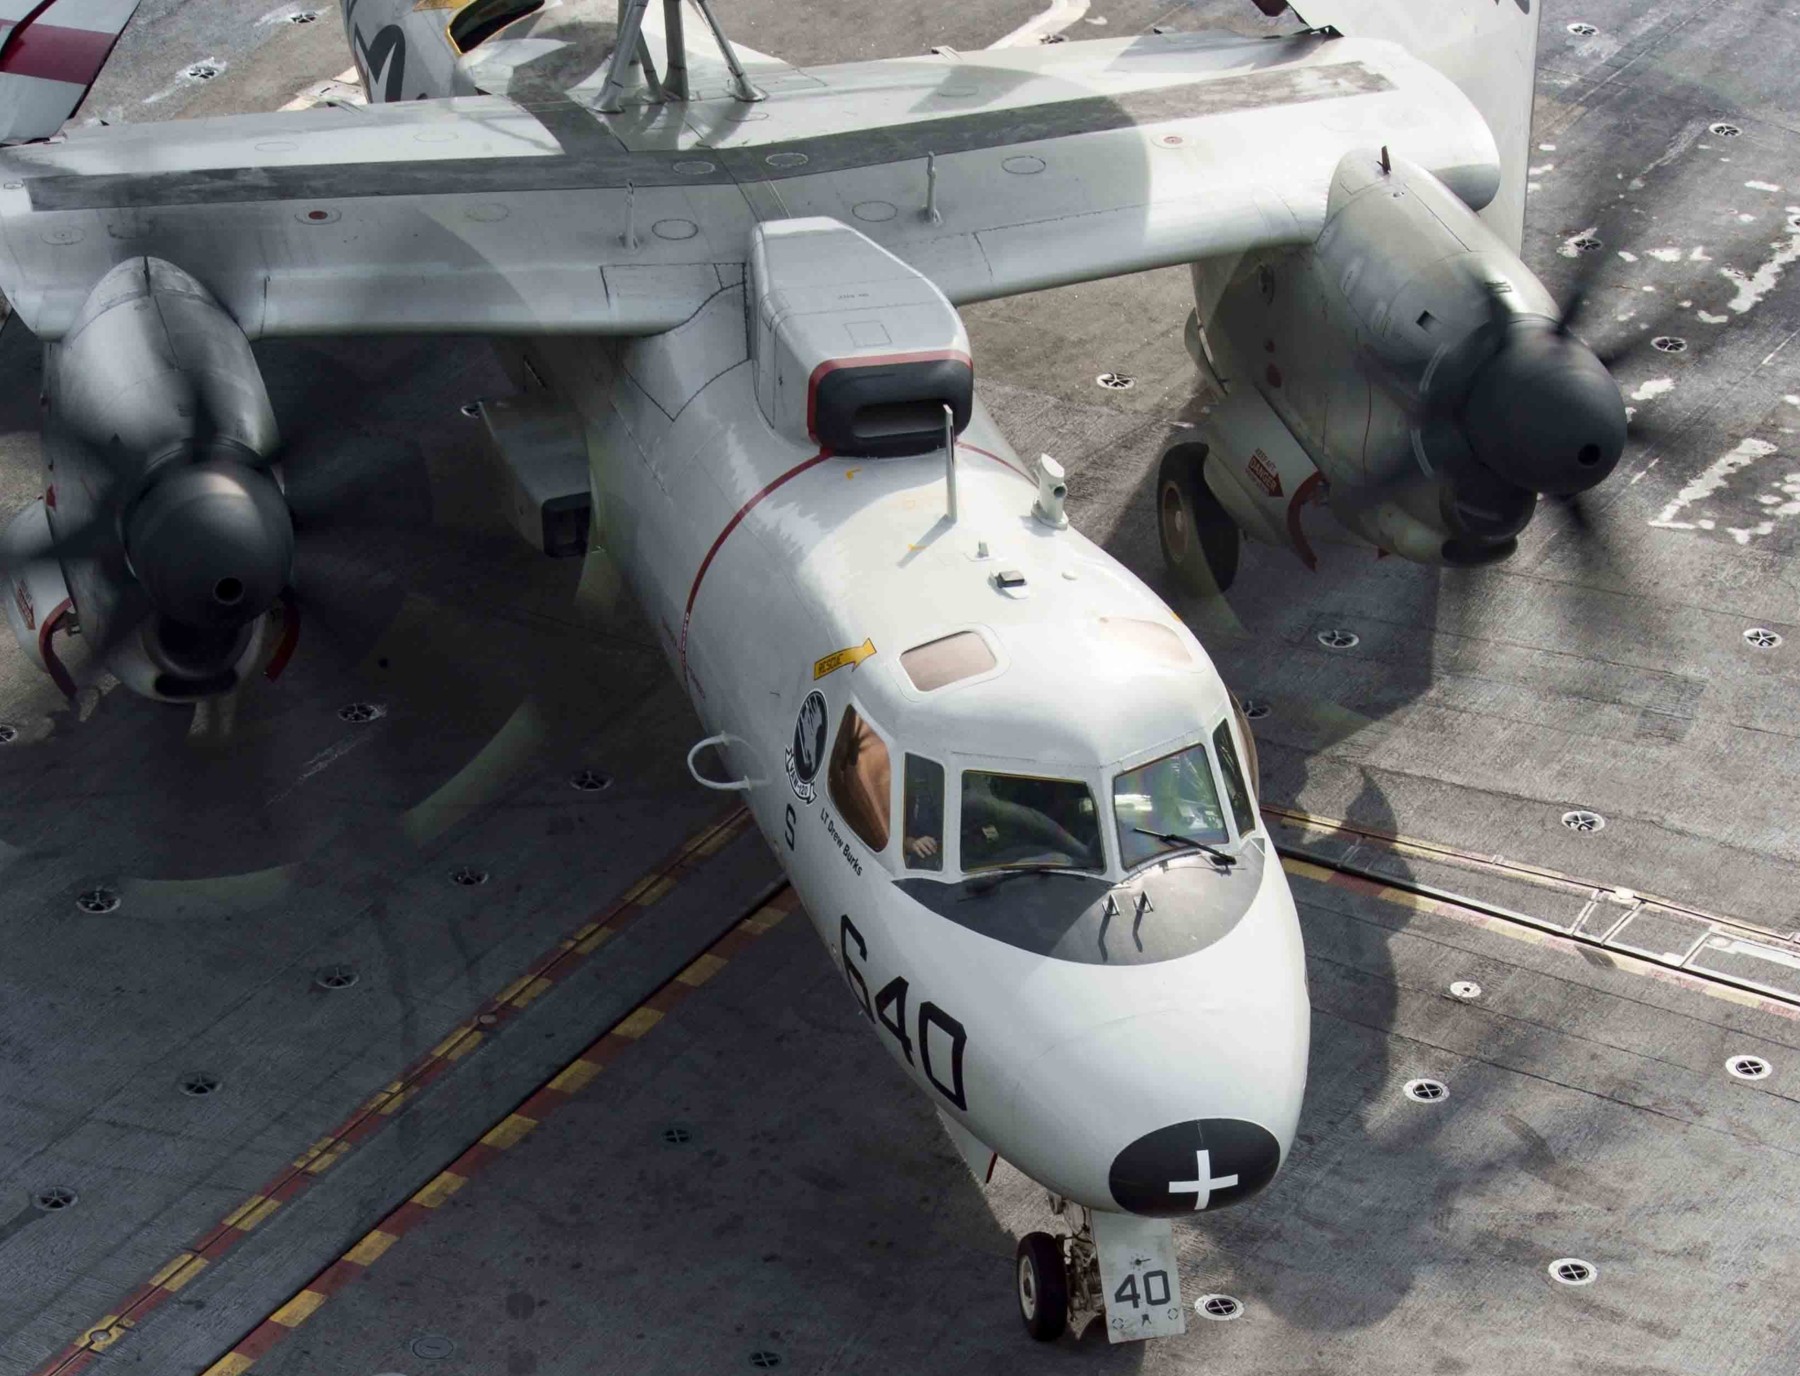 vaw-120 greyhawks carrier airborne early warning squadron e-2c hawkeye replacement uss dwight d. eisenhower cvn-69 79